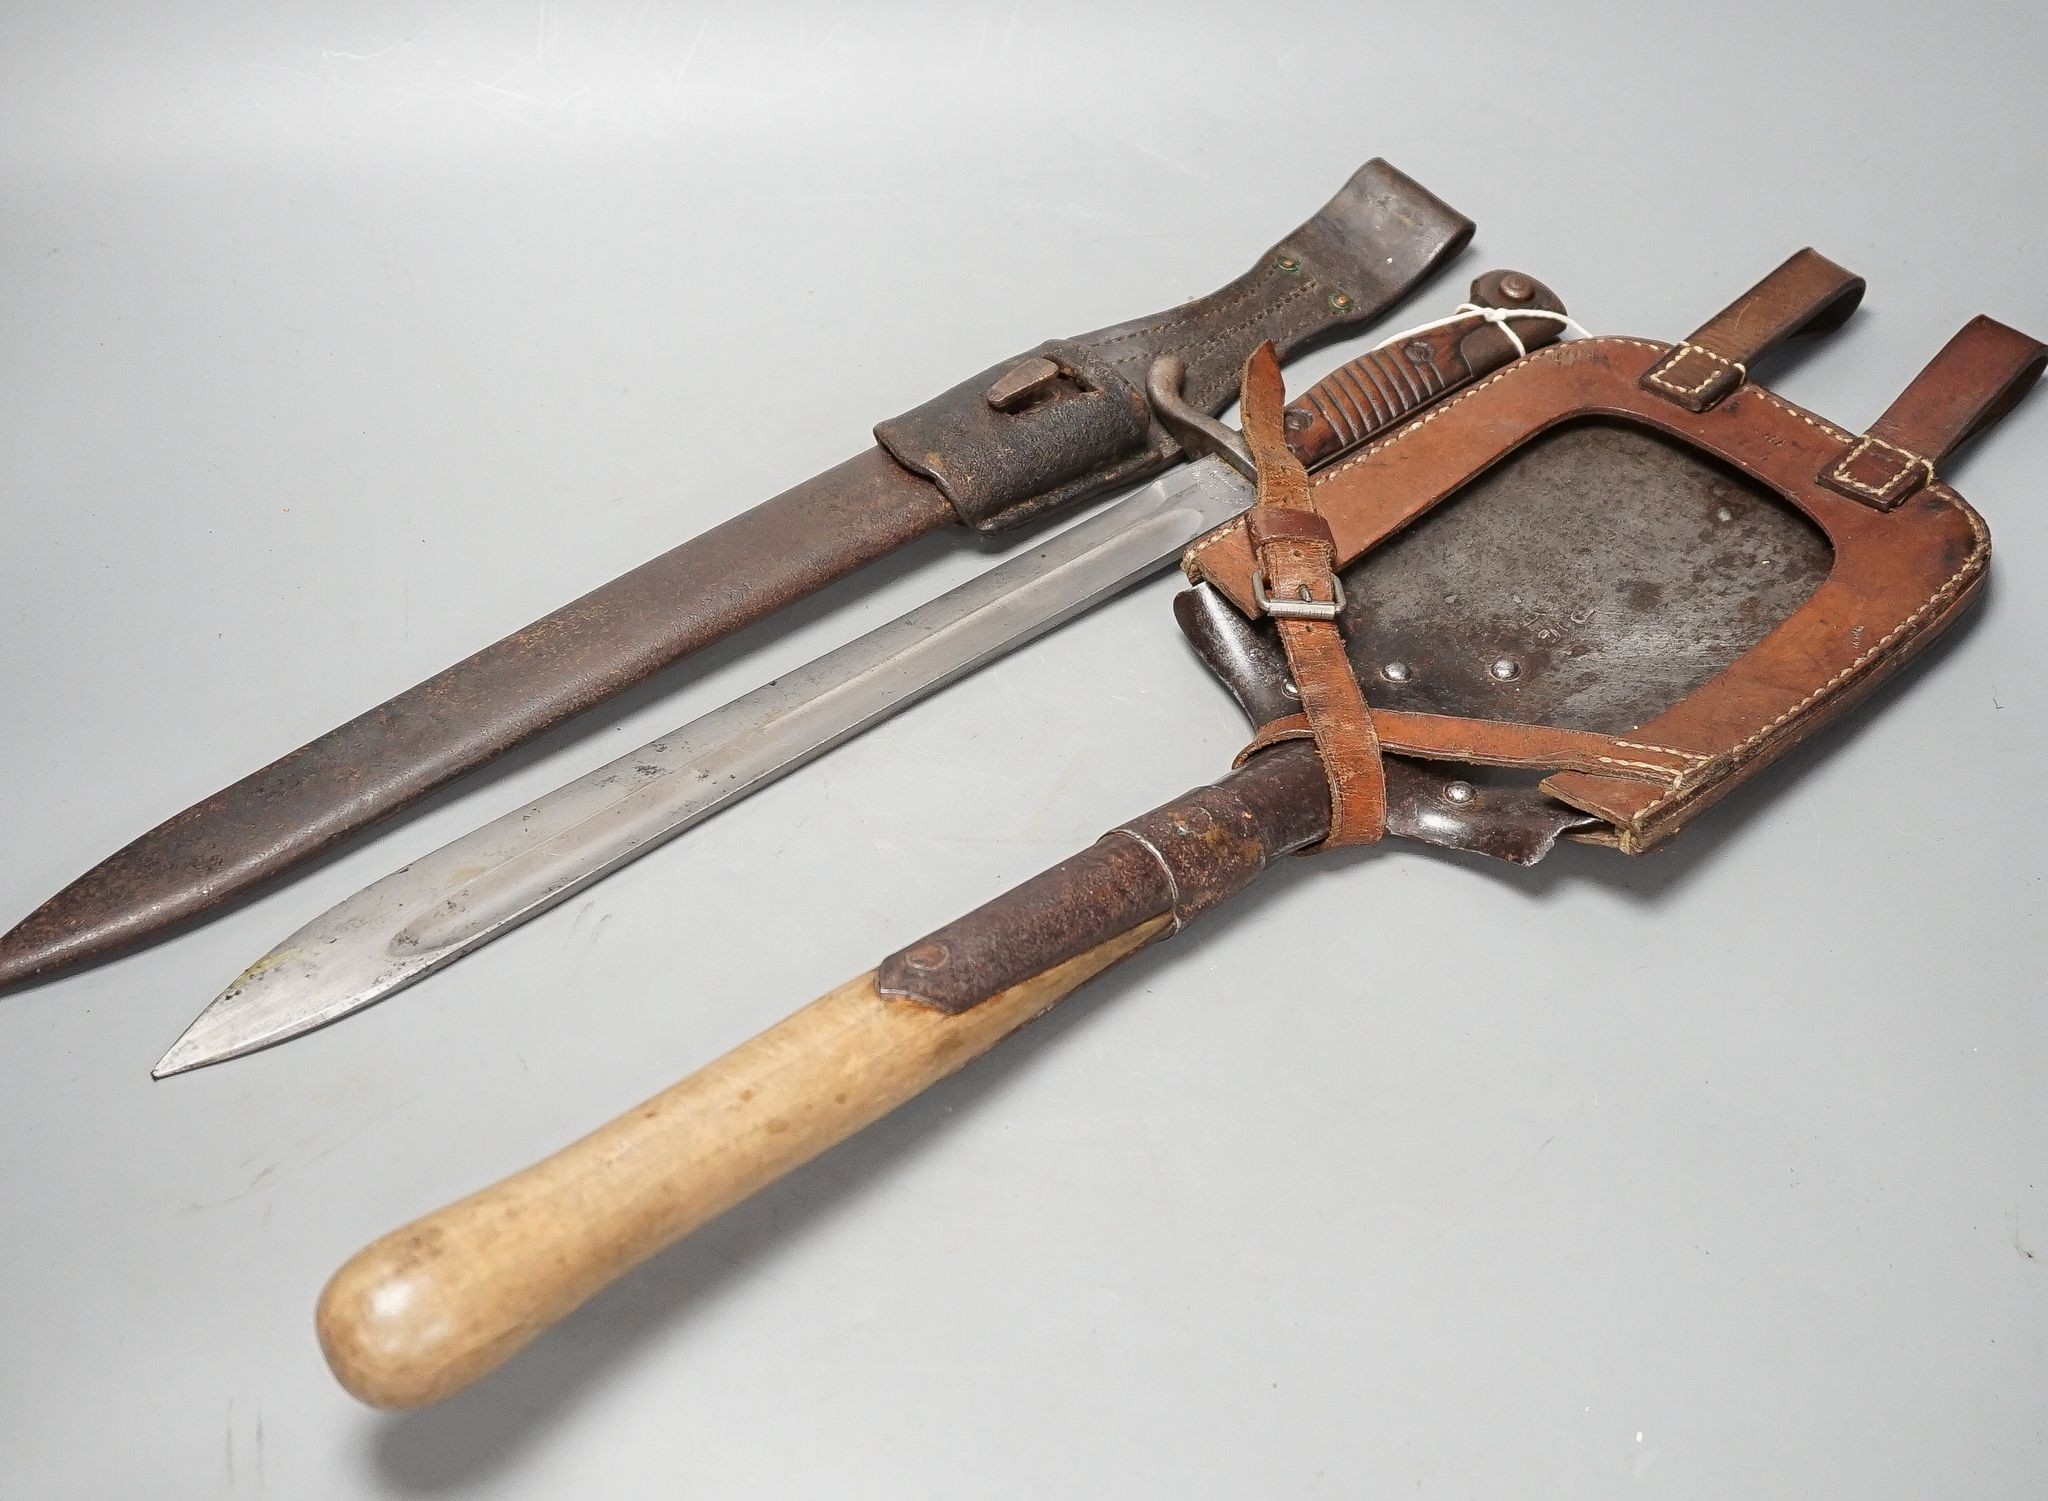 UA WWI German pioneer's spade, in leather mount, and a H.Mundeos & Co. bayonet with scabbard